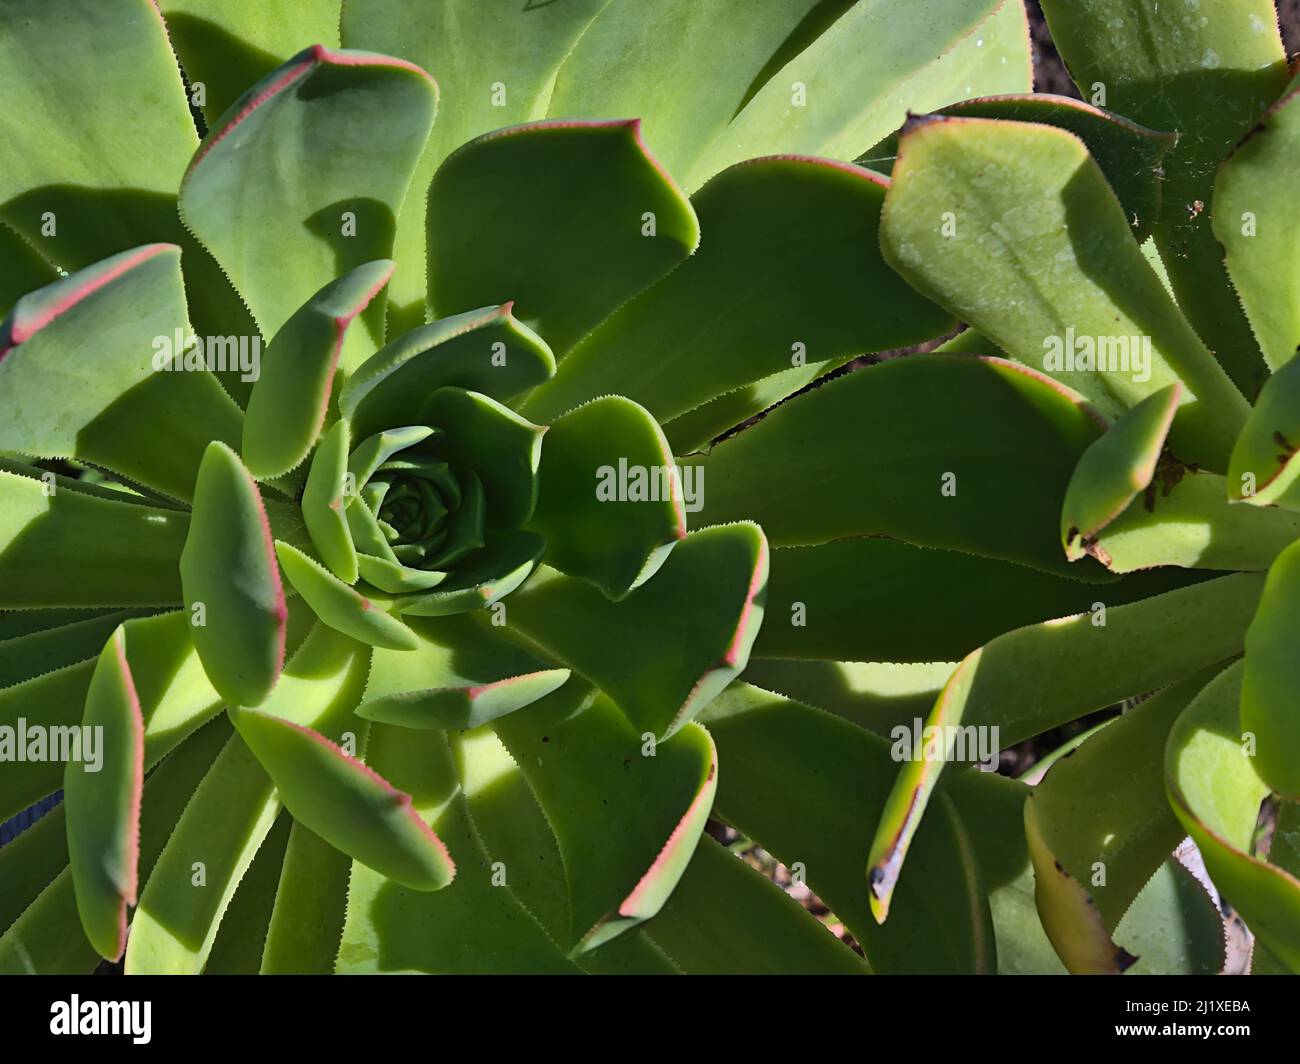 Close-up view of a beautiful Aeonium valverdense plant, endemic in the Canary Islands, with green patterned thick leaves viewed in Gran Canaria, Spain. Stock Photo